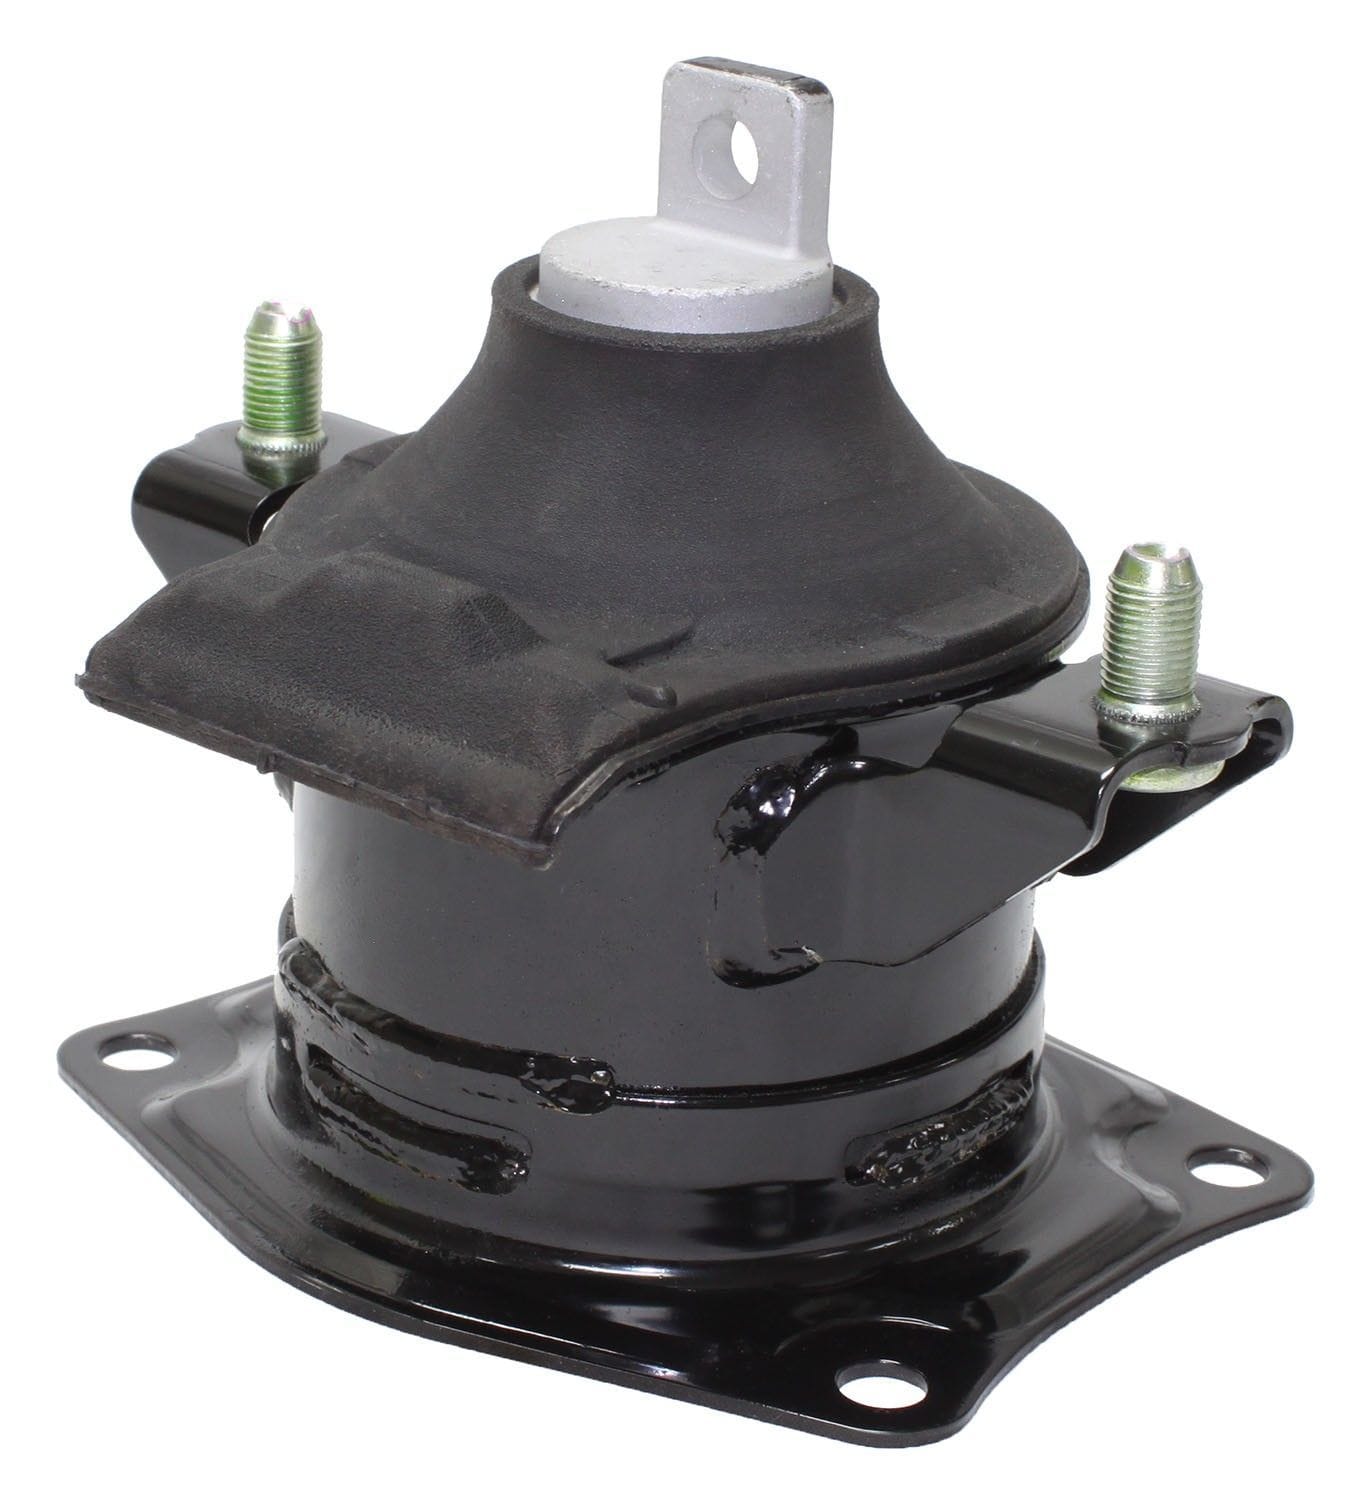 Miscellaneous - CLOSED: 2004-2008 Acura TL OEM Rear Motor Mount - New - 2004 to 2008 Acura TL - West Palm Beach, FL 33409, United States